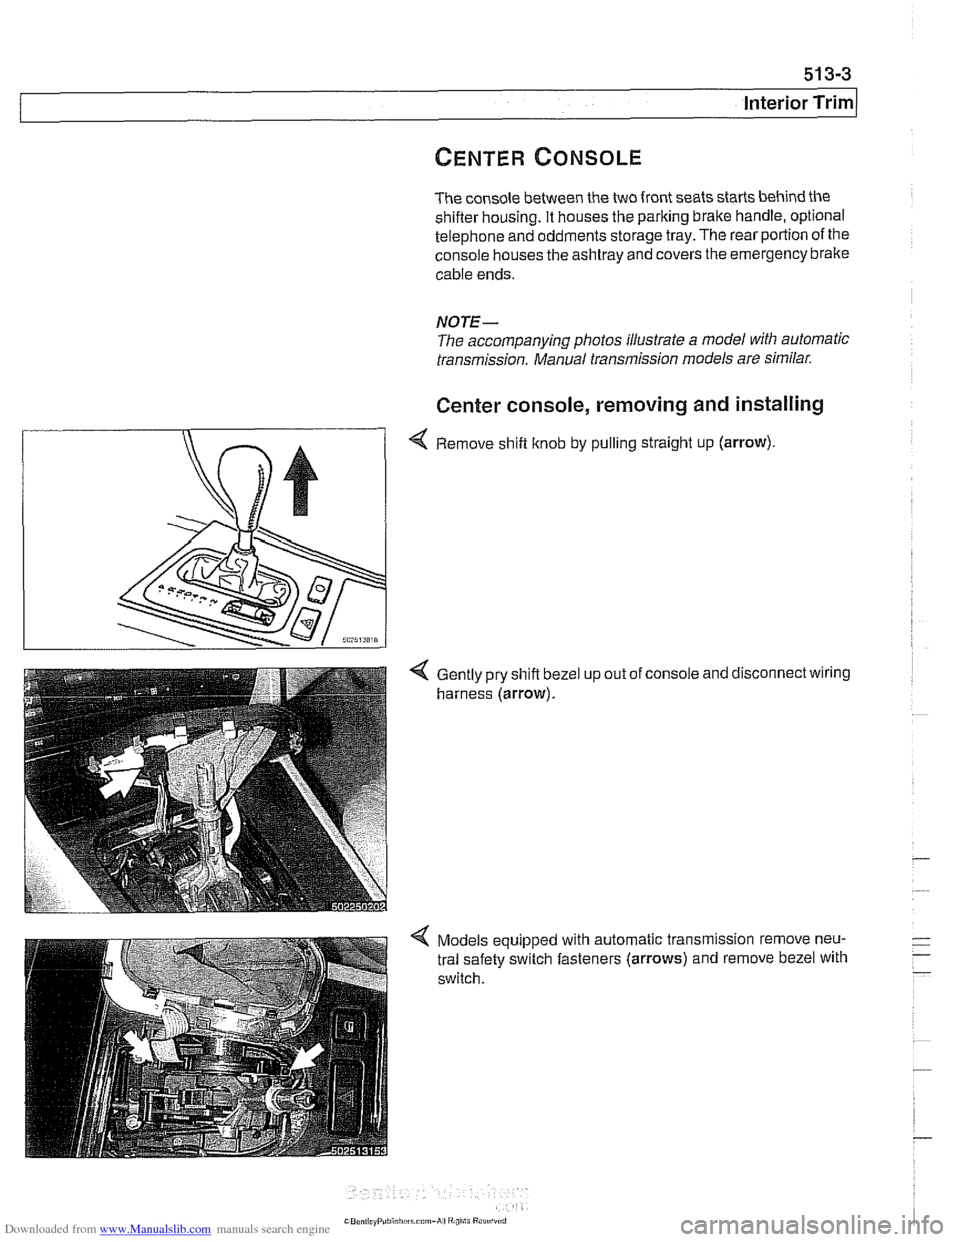 BMW 528i 1998 E39 User Guide Downloaded from www.Manualslib.com manuals search engine 
513-3 
Interior ~rirnl 
The console between the two front seats starts behind the shifler housing. It houses the parking brake handle, optiona